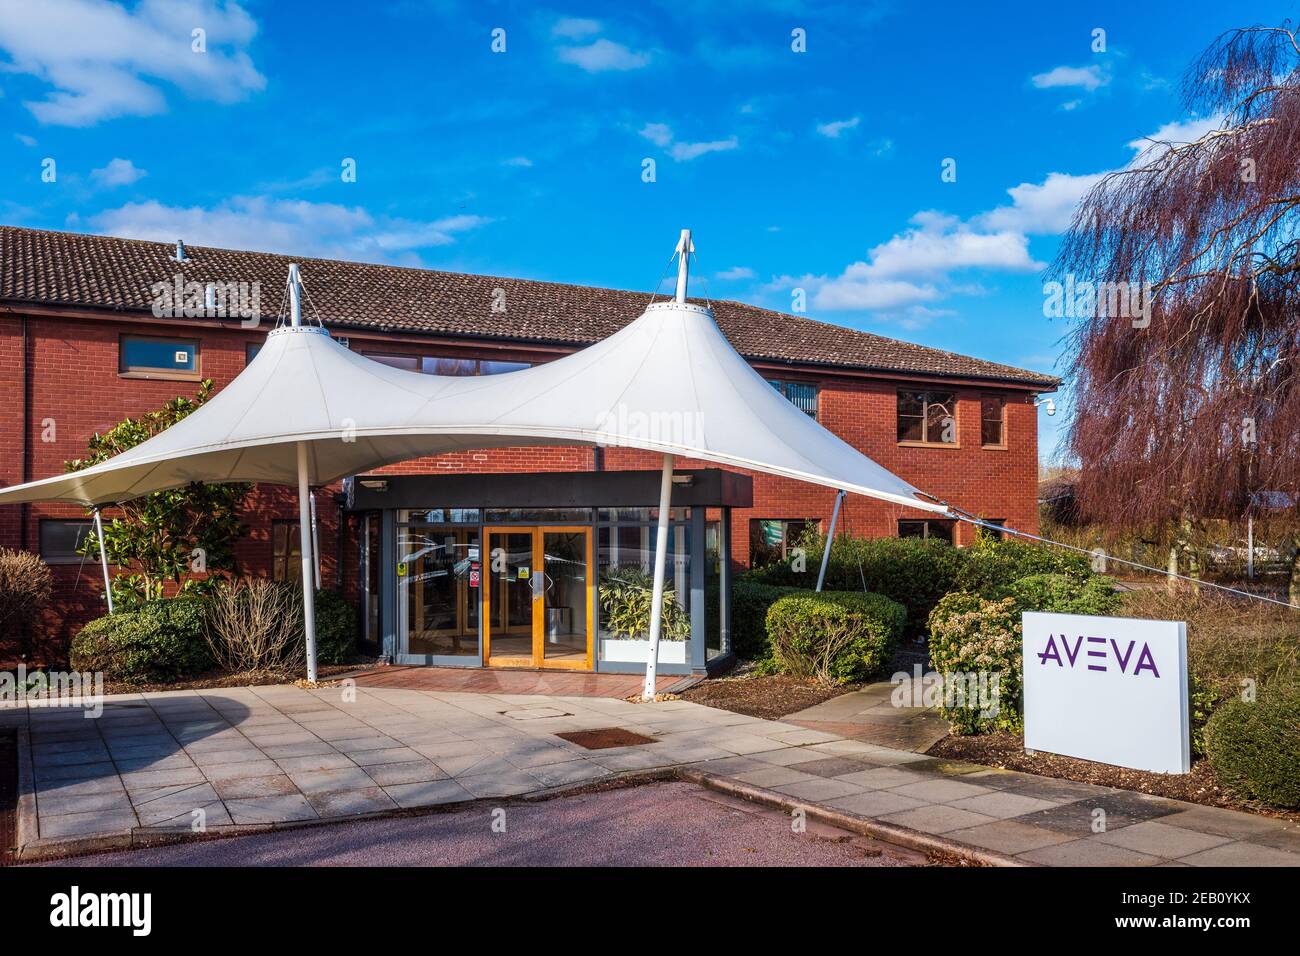 Aveva HQ in Cambridge, UK - Aveva is an Engineering, Design & Information Management Software Providers to the Process, Plant & Marine Industries Stock Photo